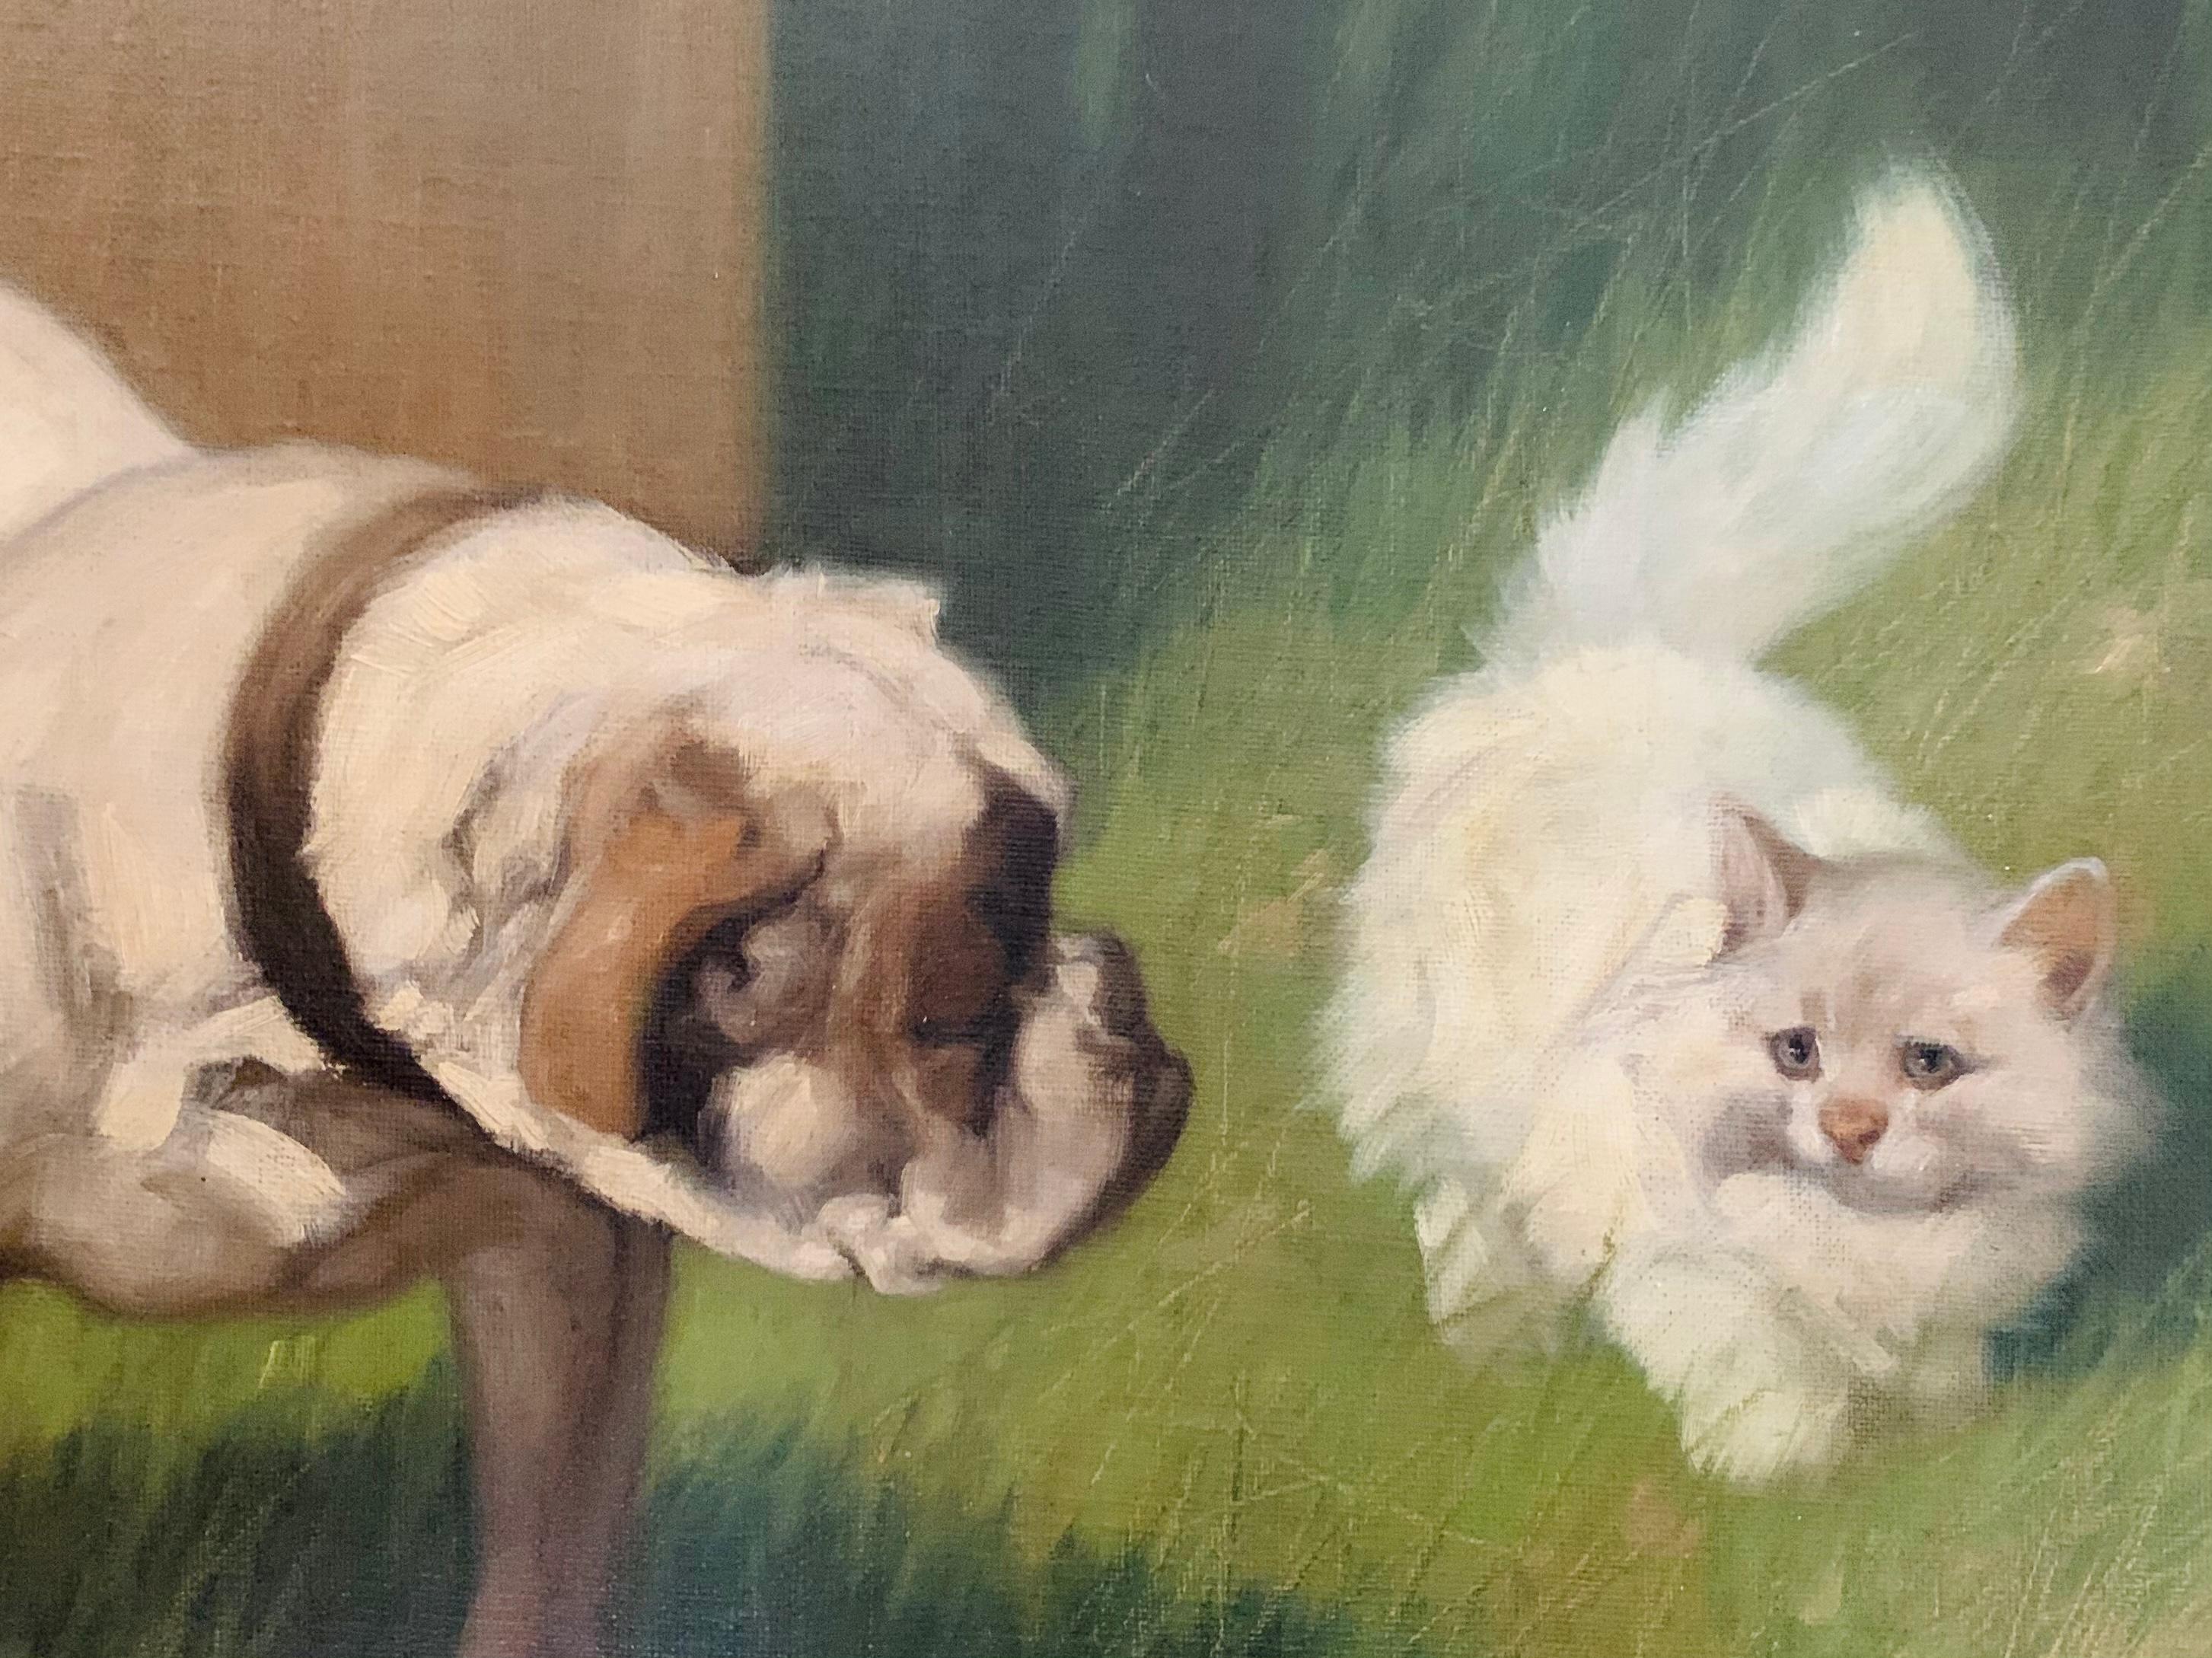 Dog Guarding Food Bowl From a Fluffy White Cat - Impressionist Painting by Arthur Heyer